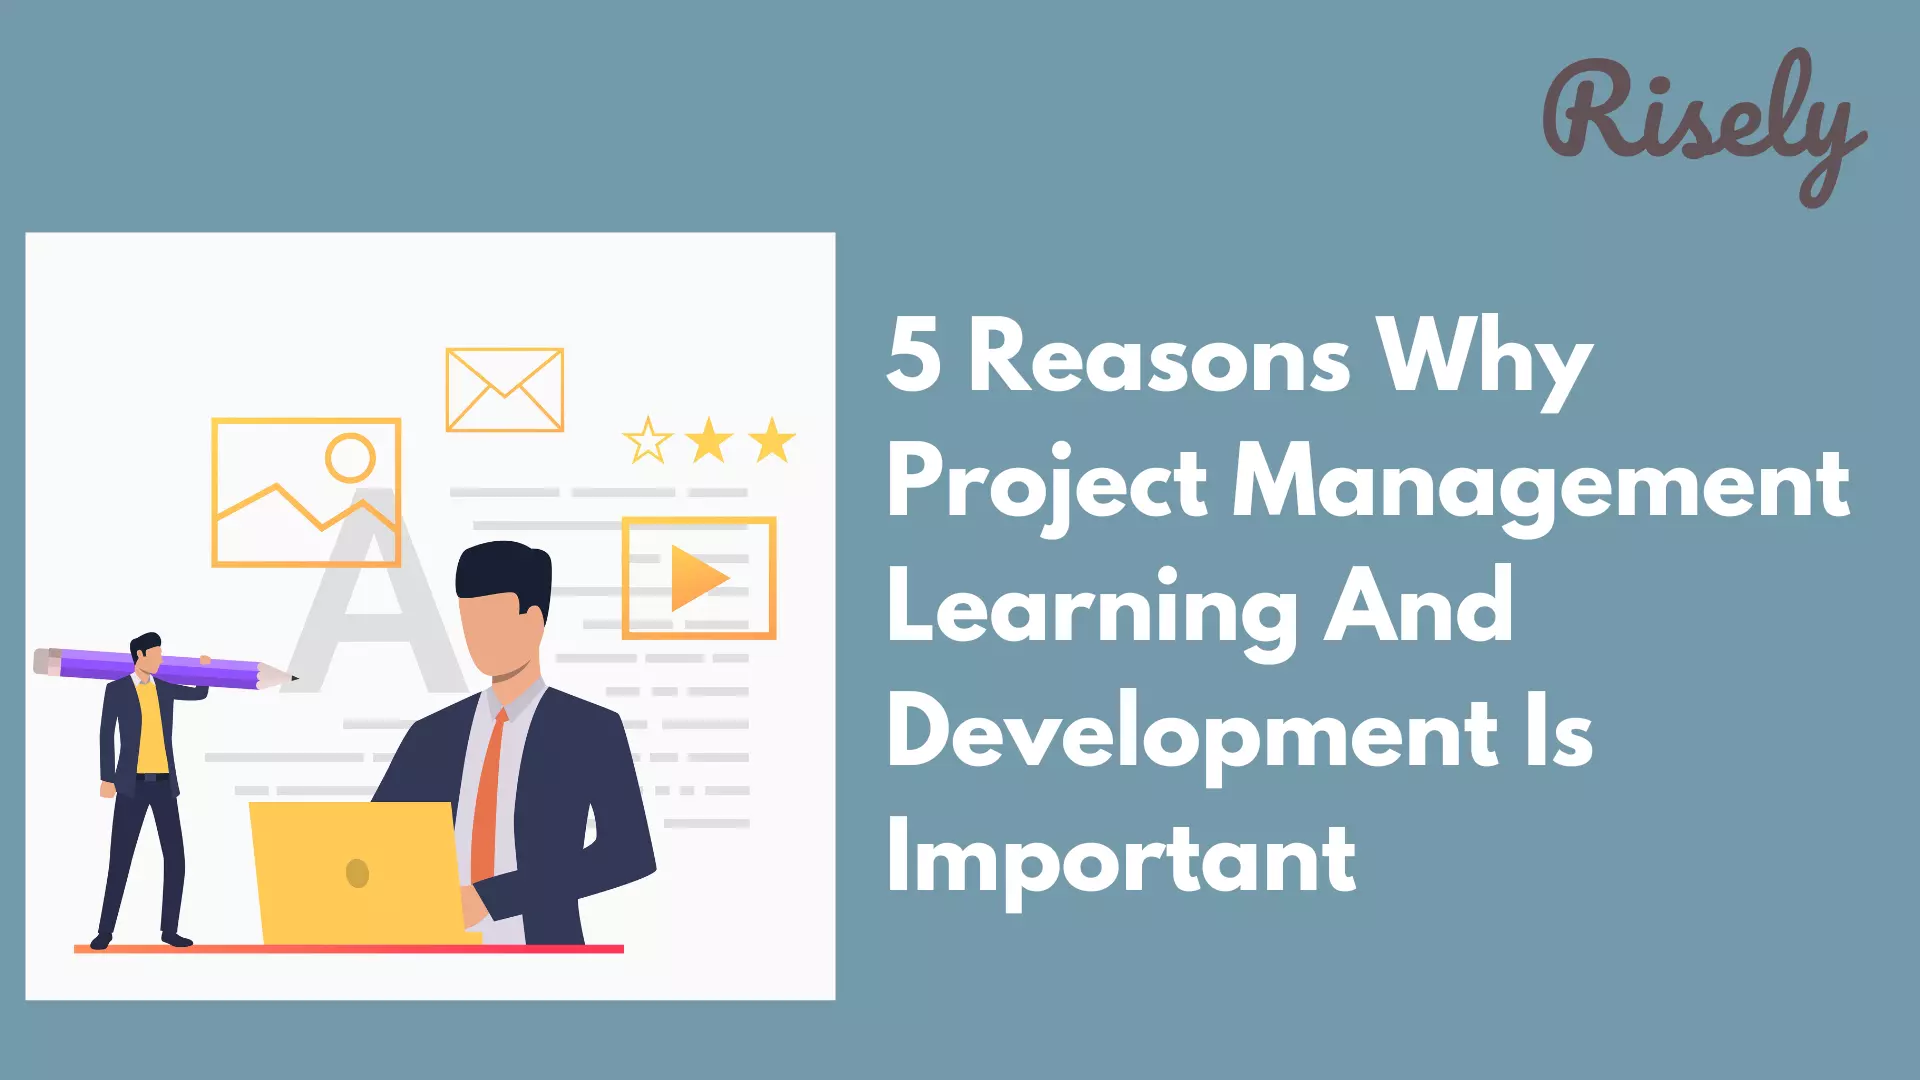 5 Reasons Why Project Management Learning And Development Is Important